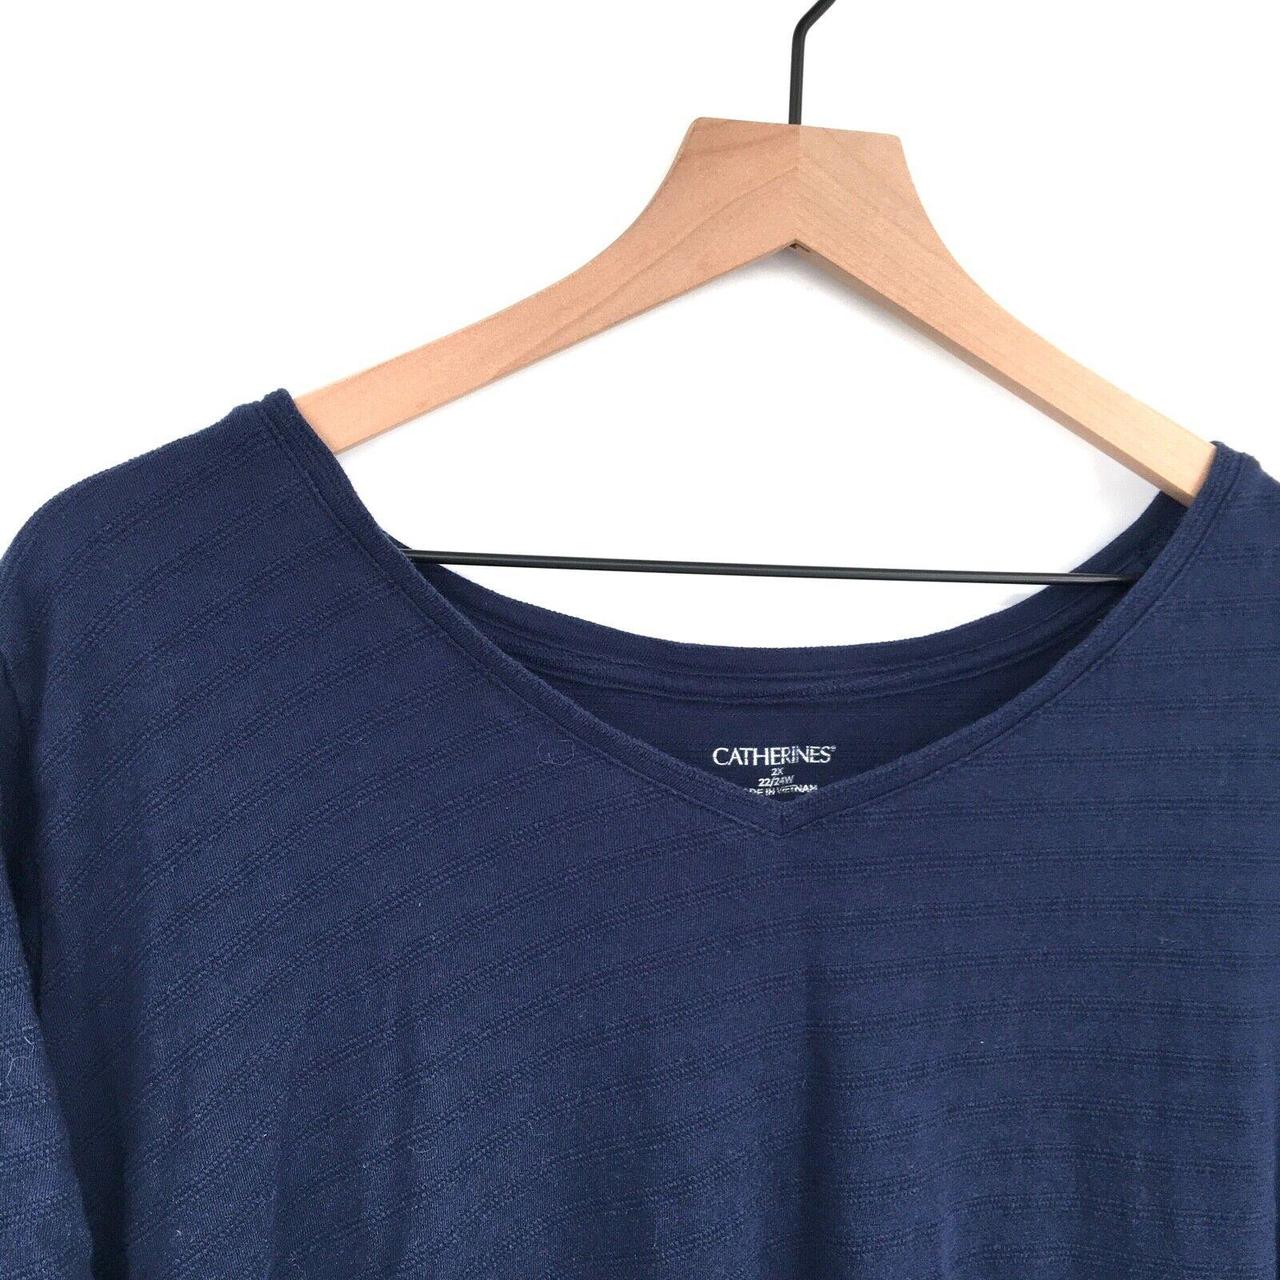 Product Image 2 - Catherines Textured stripe Knit T-Shirt